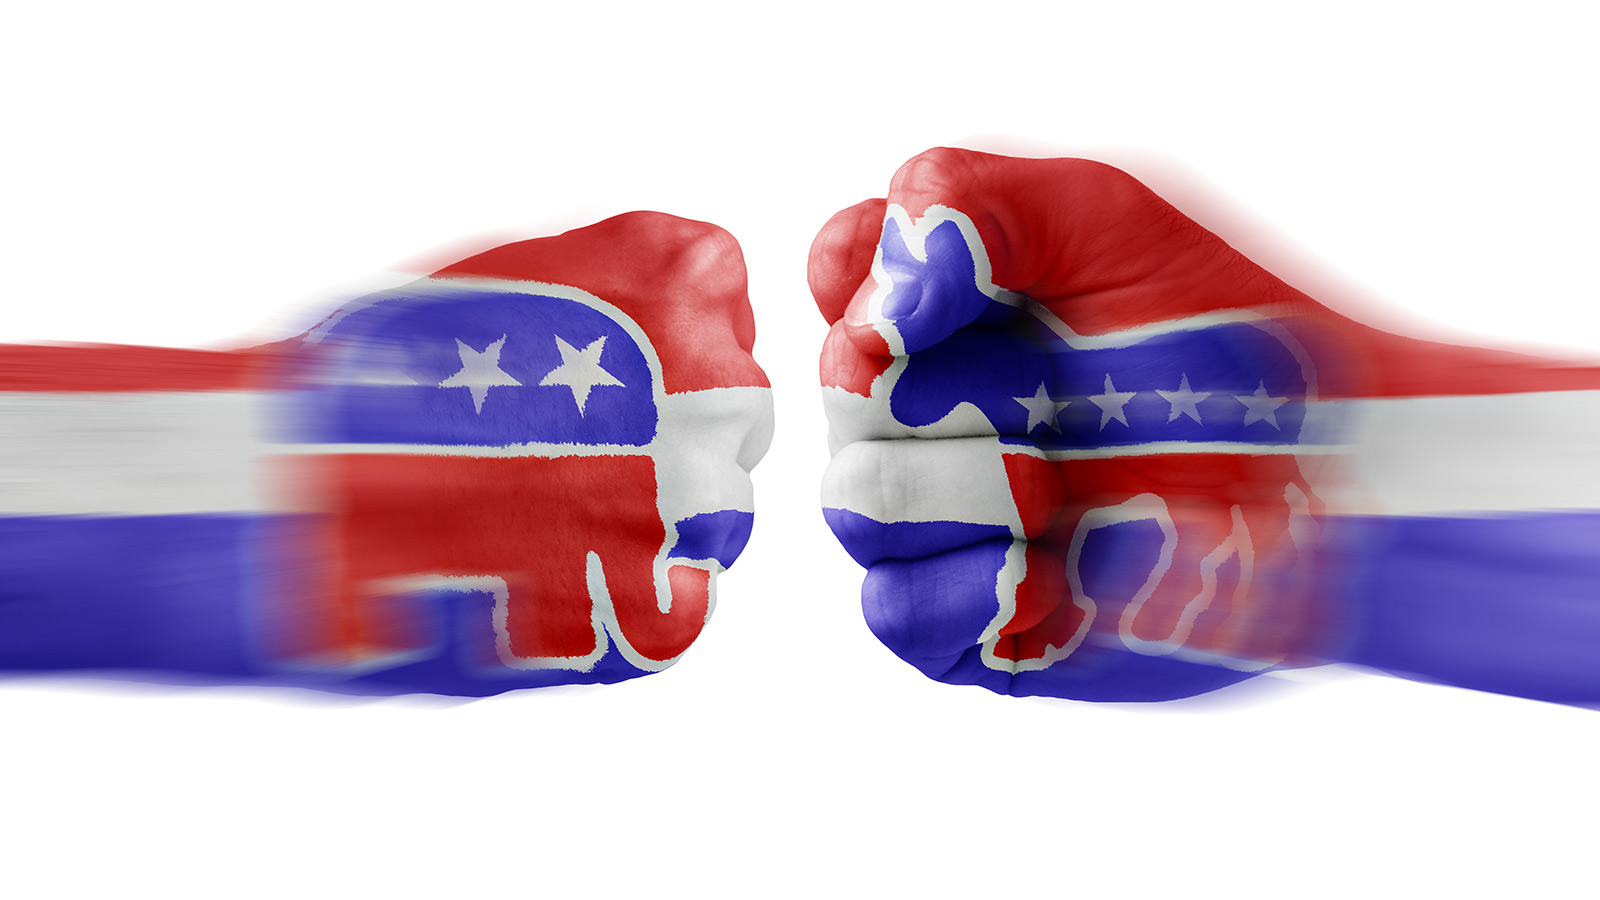 Republican and Democratic dueling fists